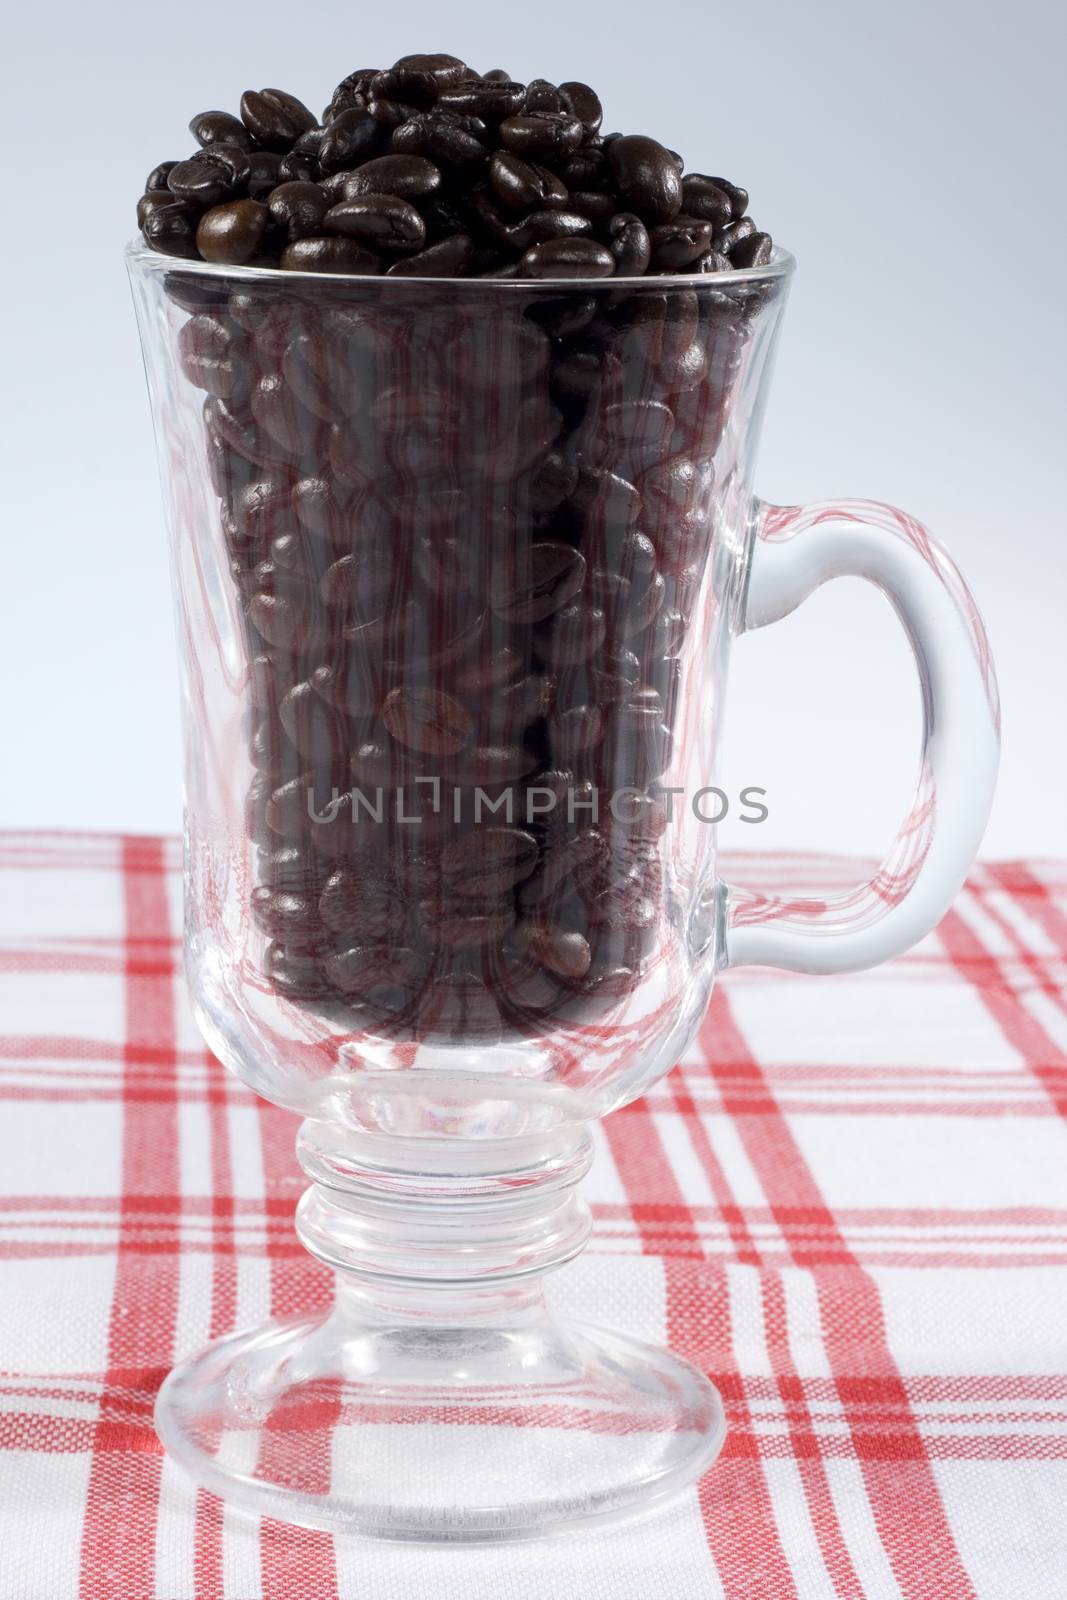 a cup of coffee beans by orcearo